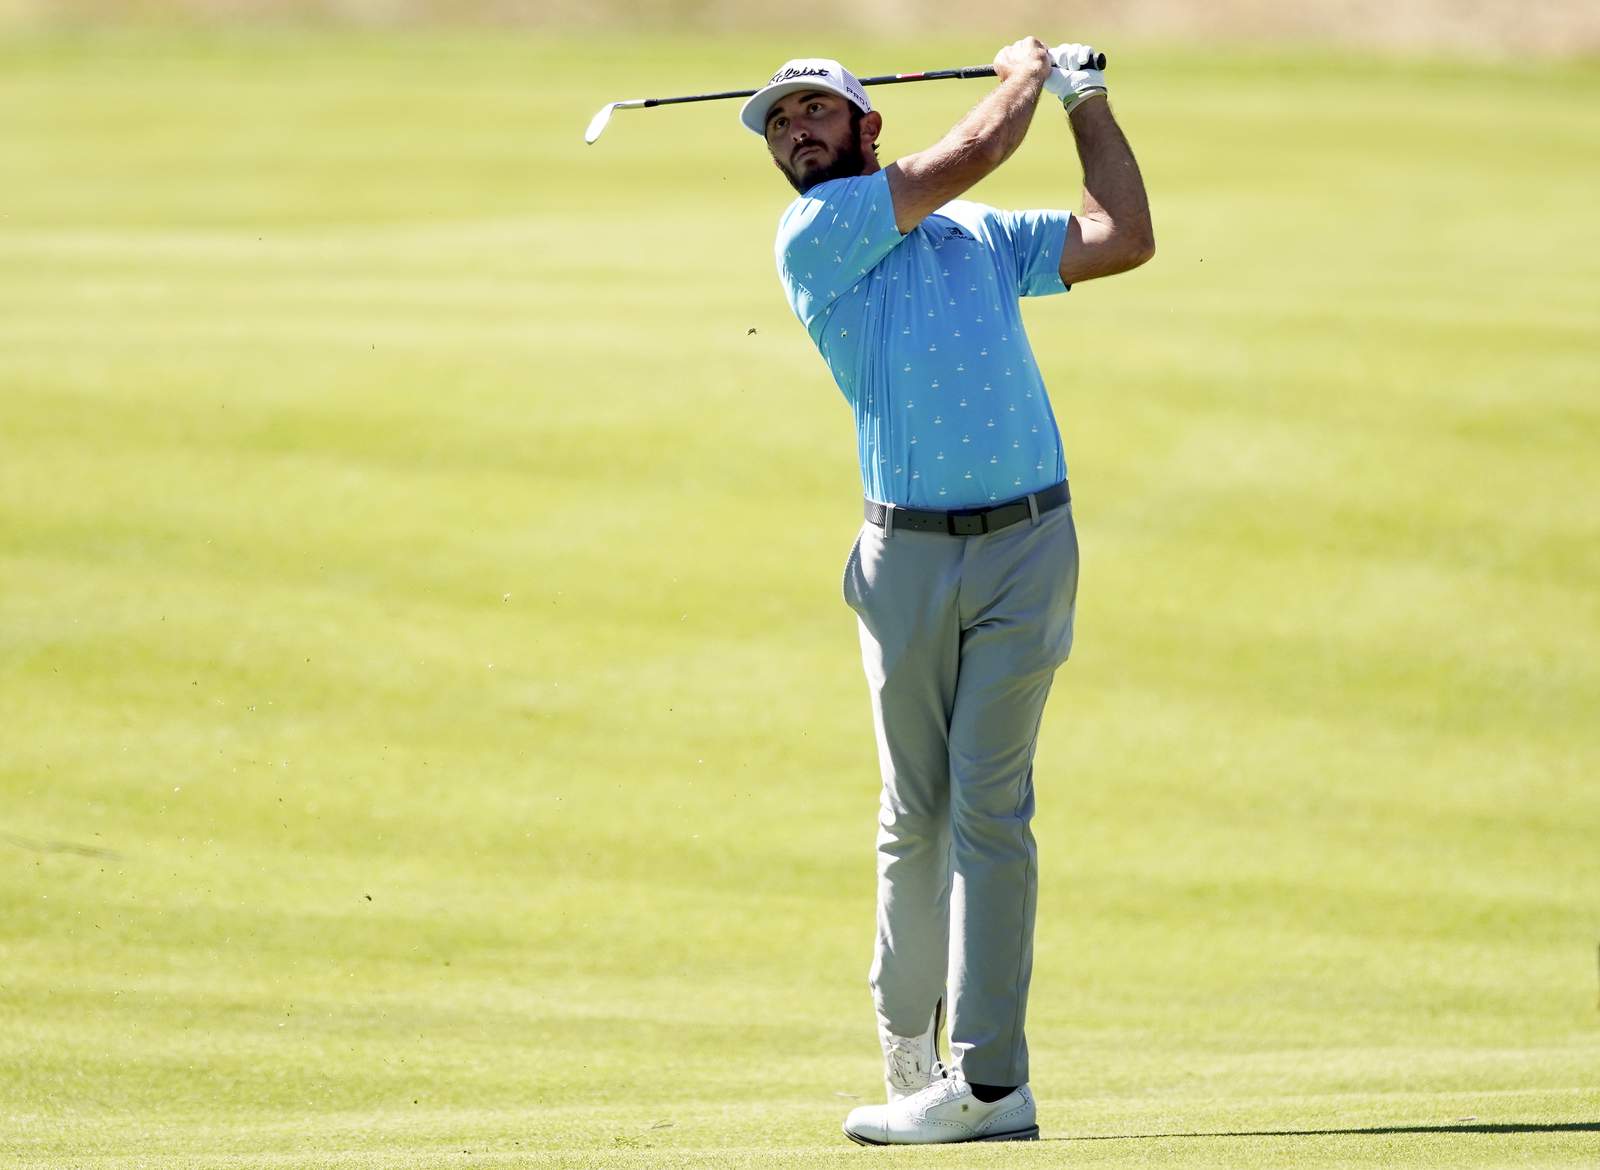 Homa gets another chance and wins hometown event at Riviera